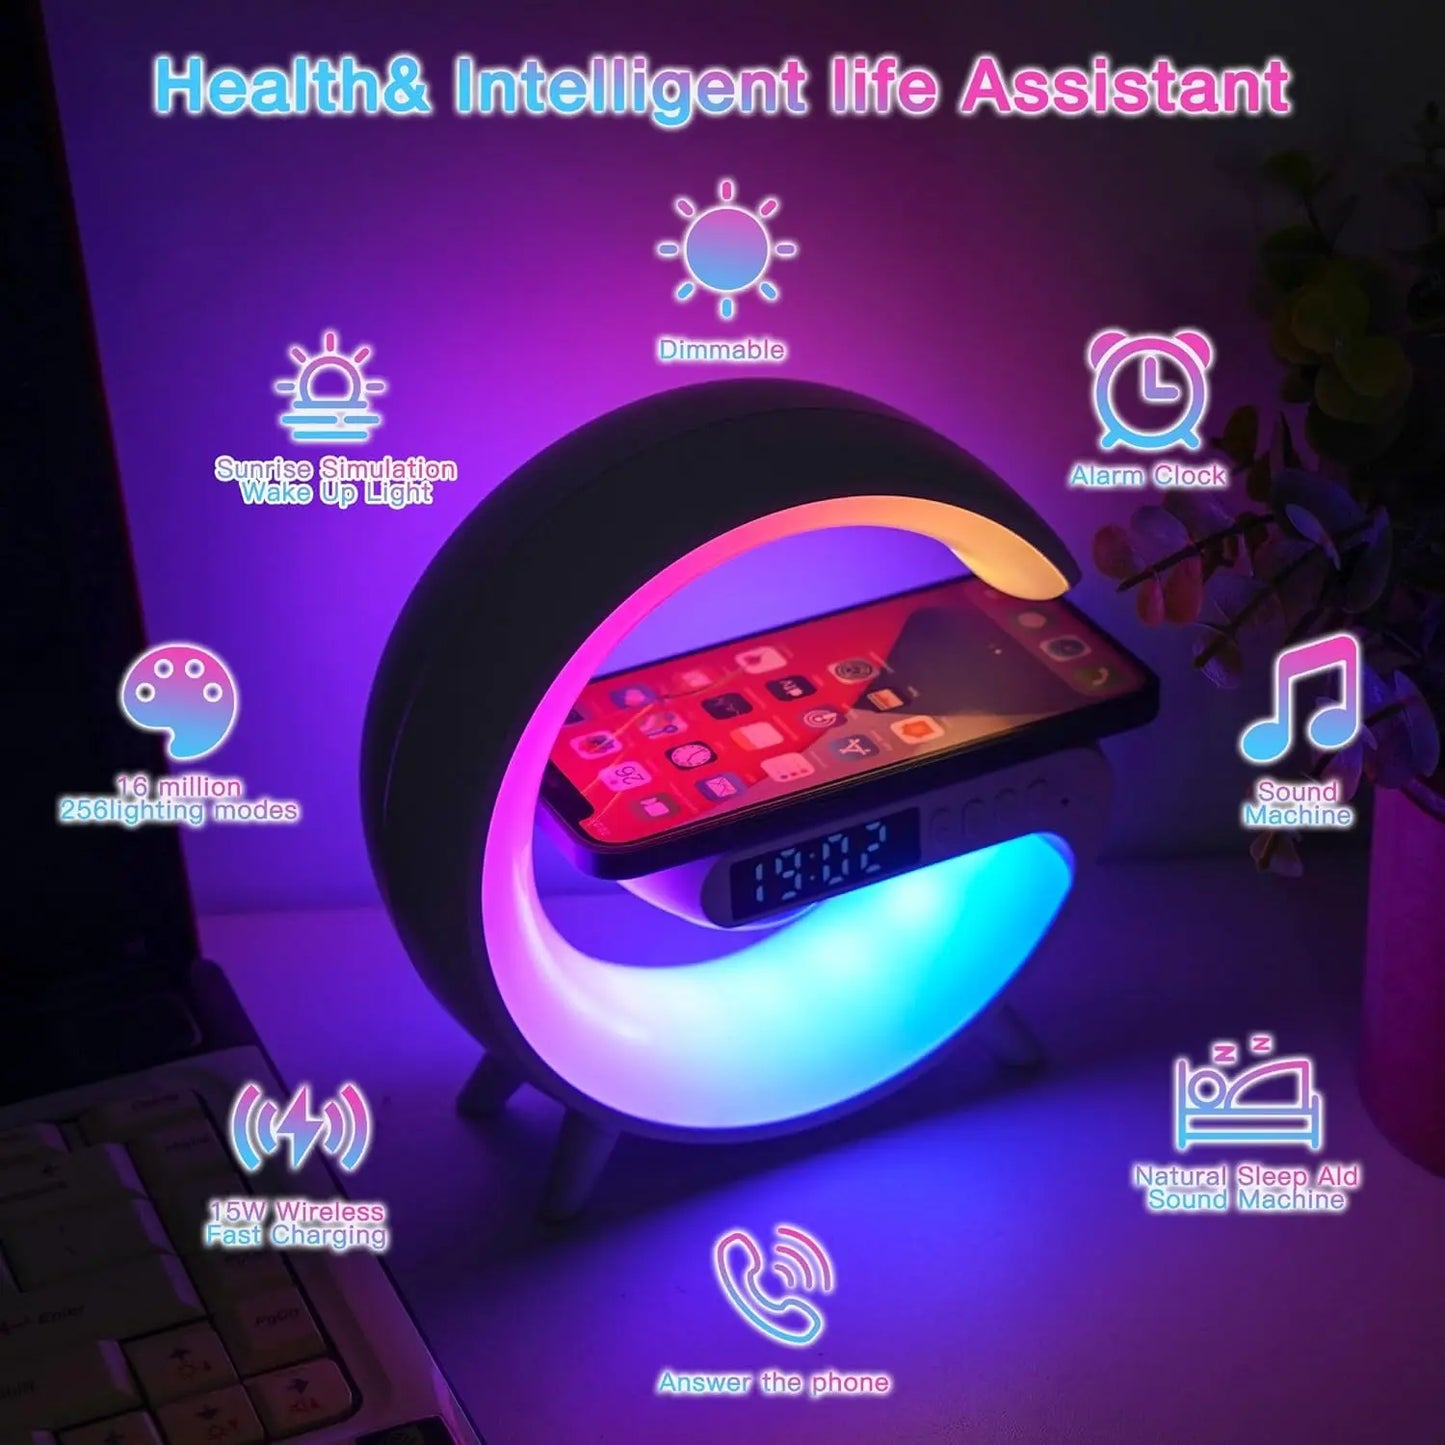 4-in-1 Wireless Speaker Charger with Atmosphere Light and Alarm Clock